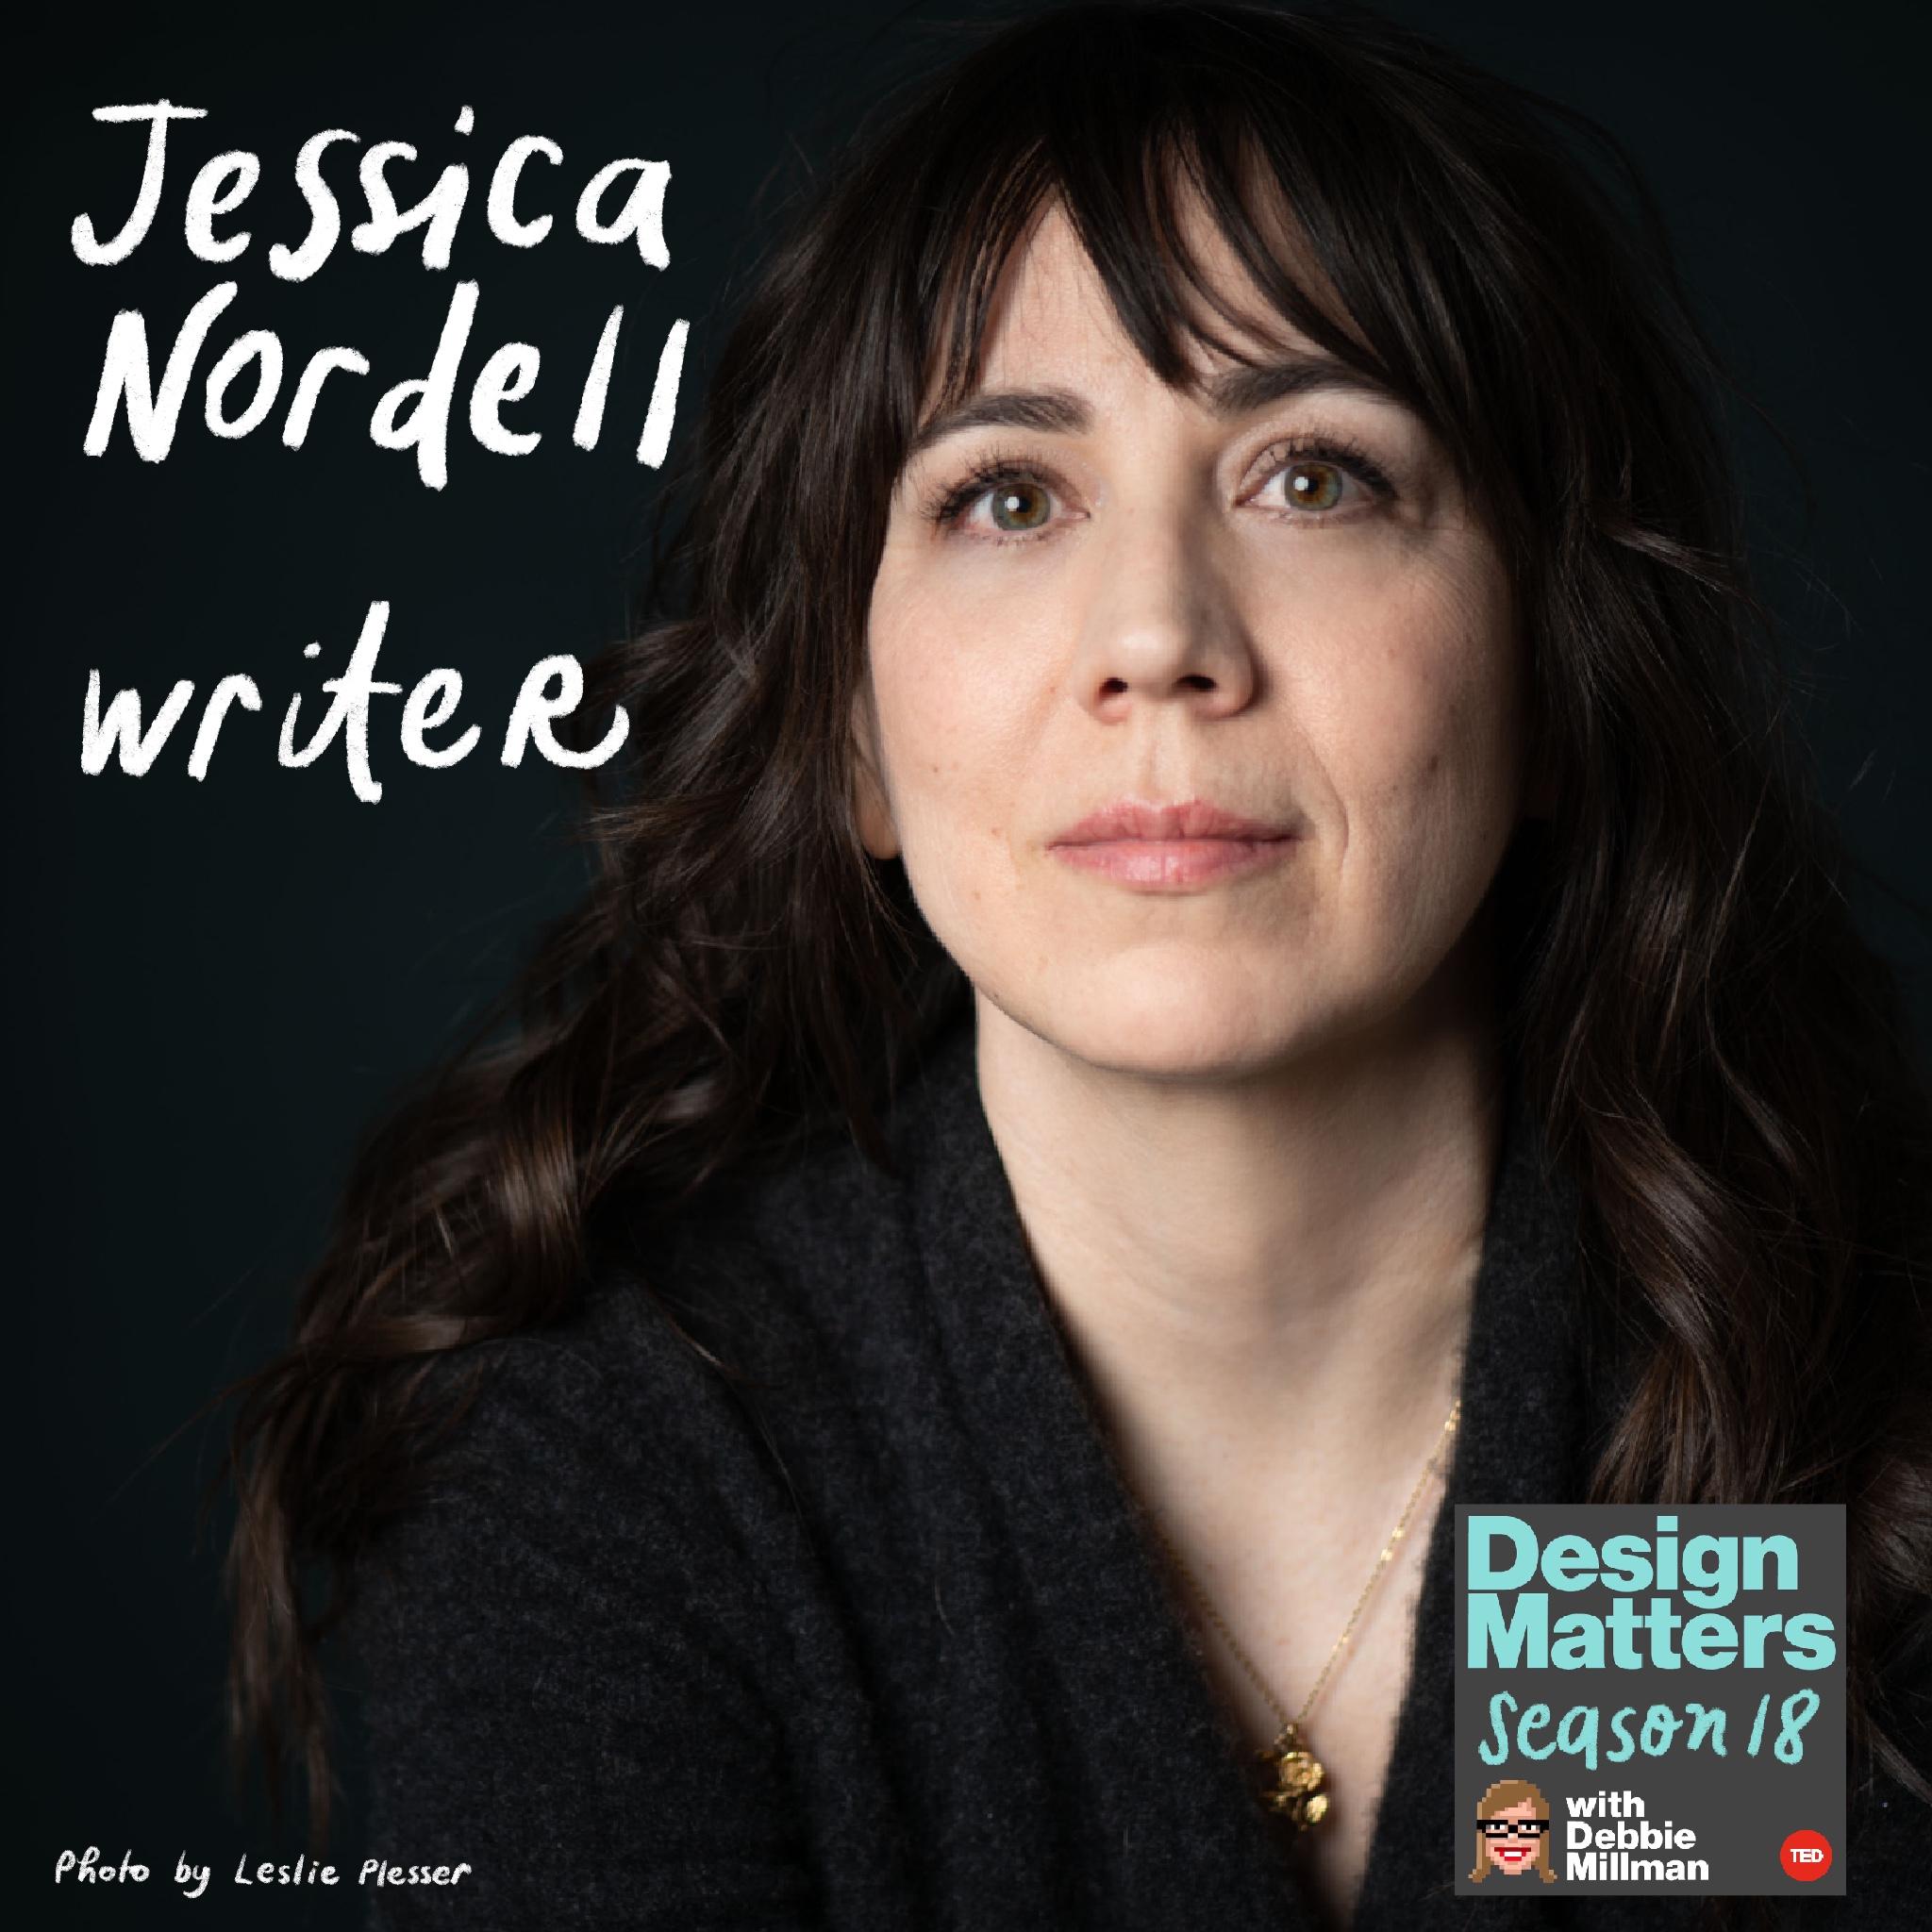 Thumbnail for "Best of Design Matters: Jessica Nordell".